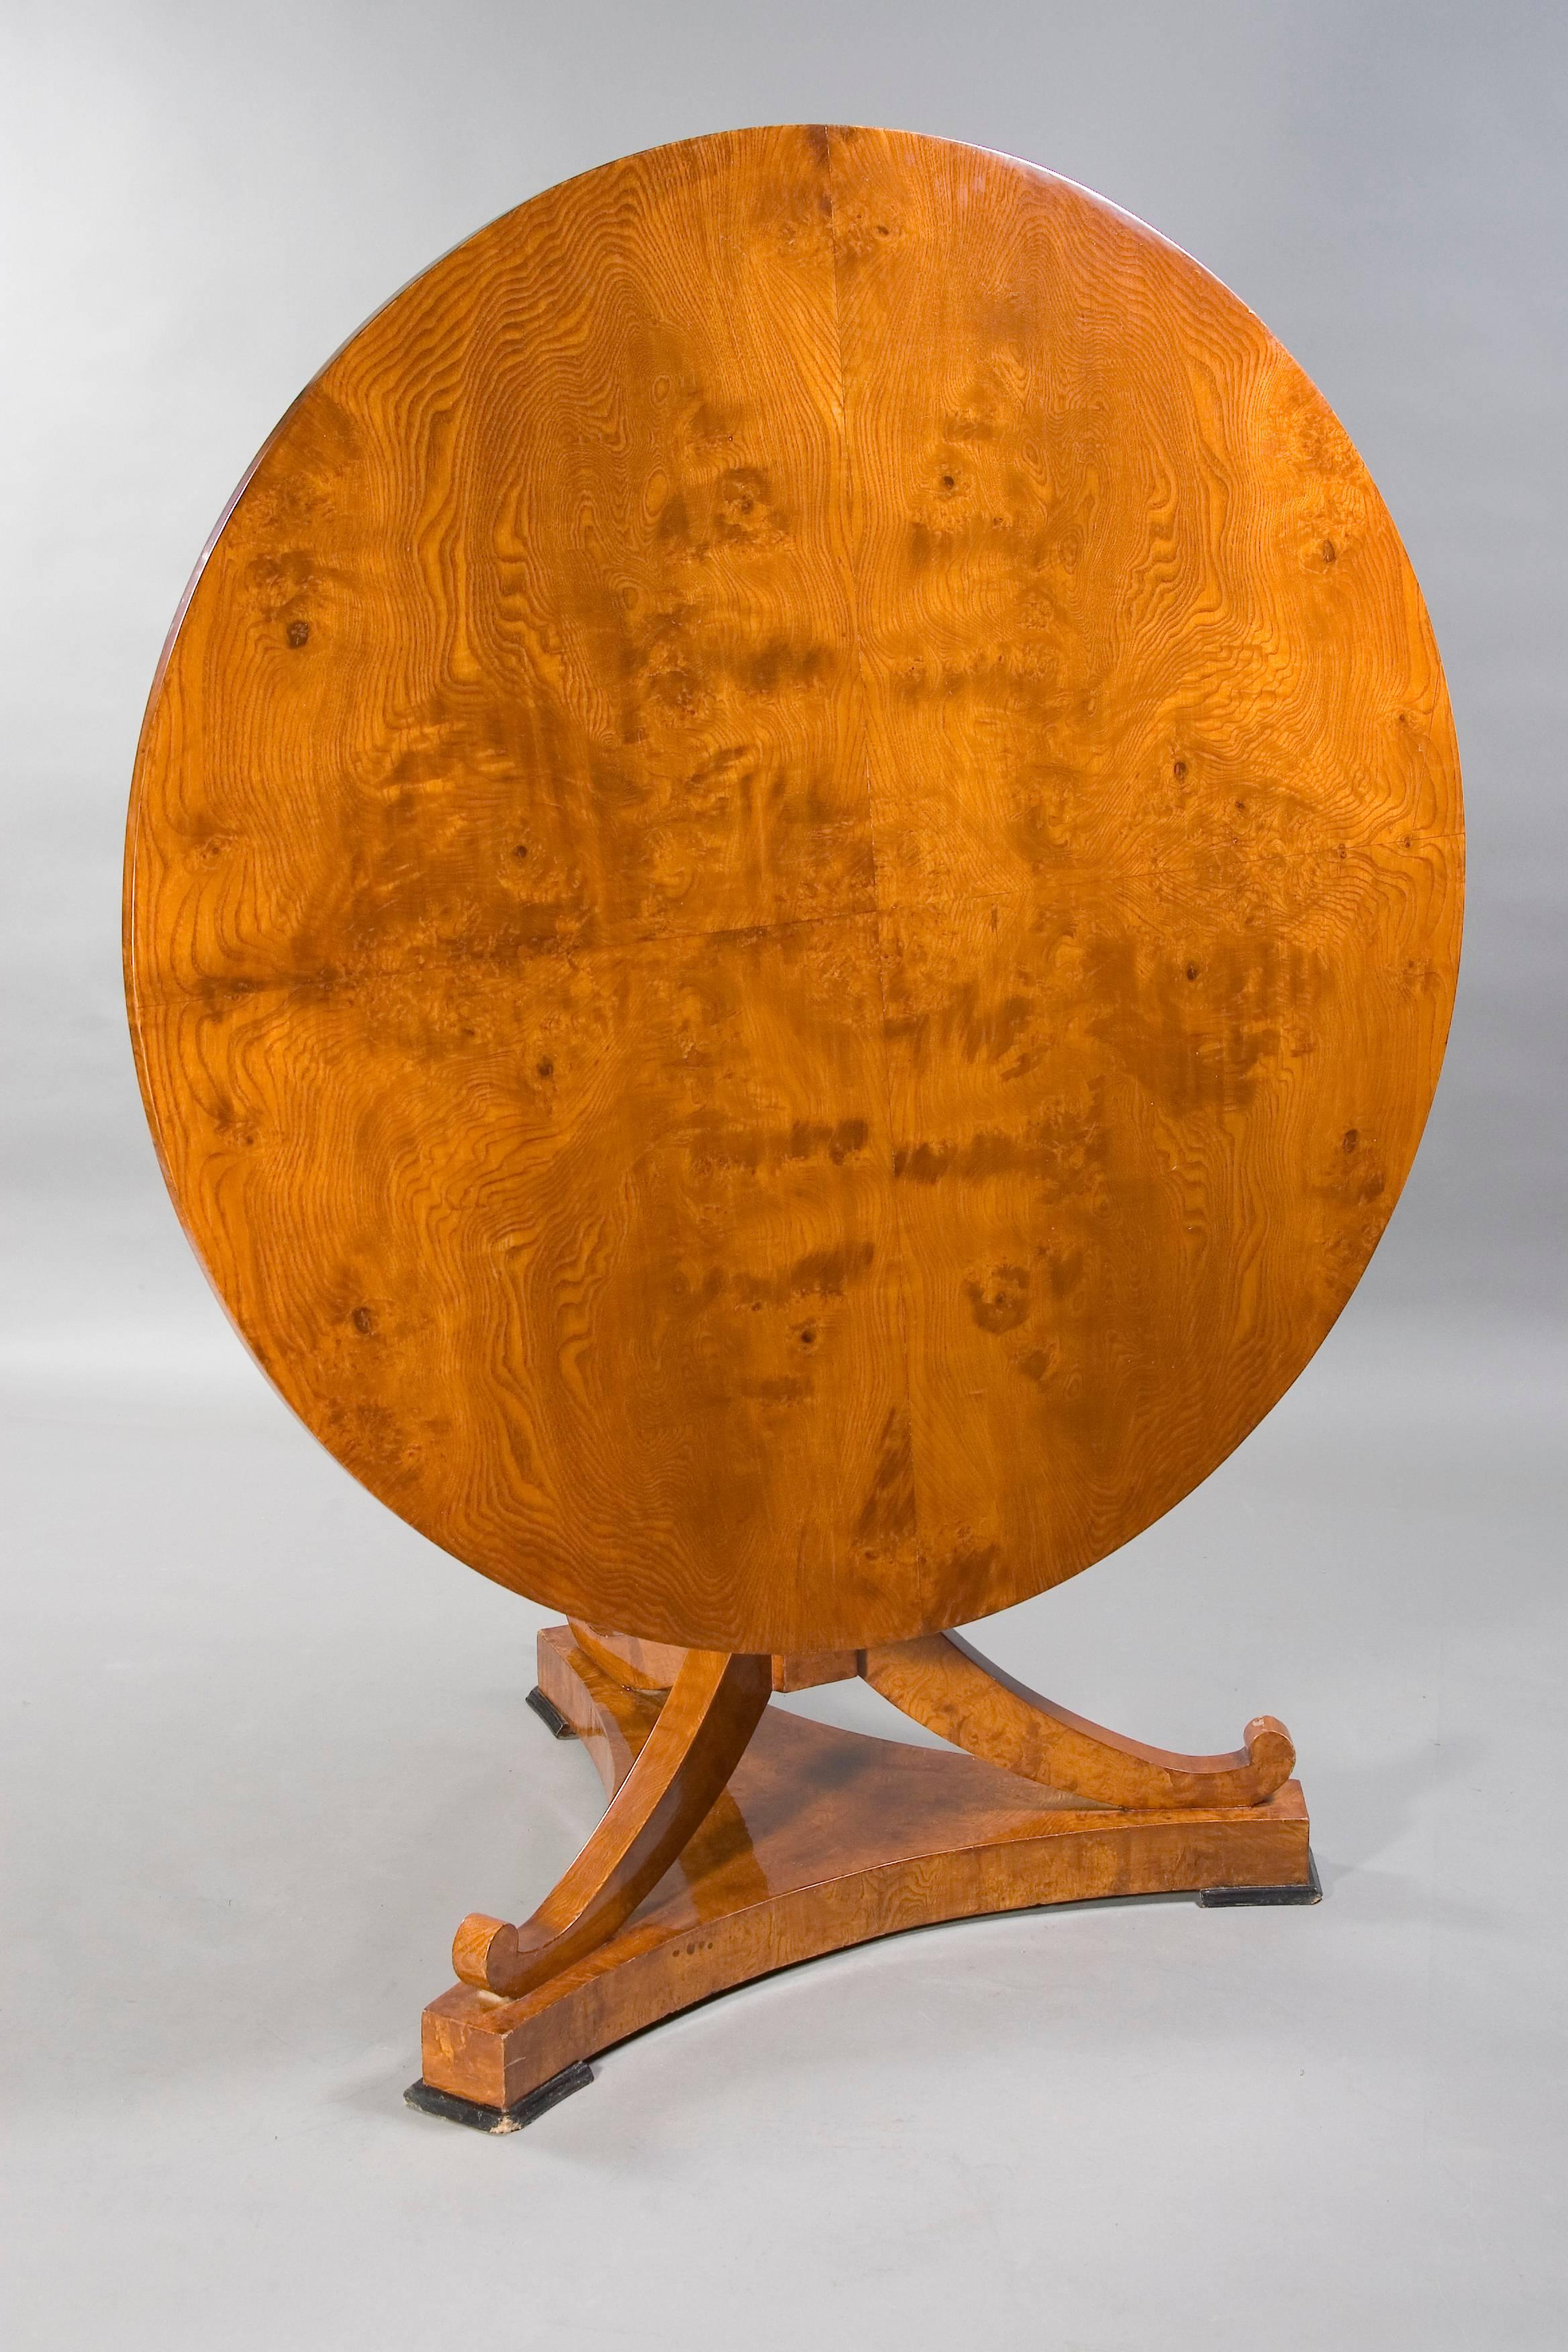 19th Century Round Folding Table in the Biedermeier Style